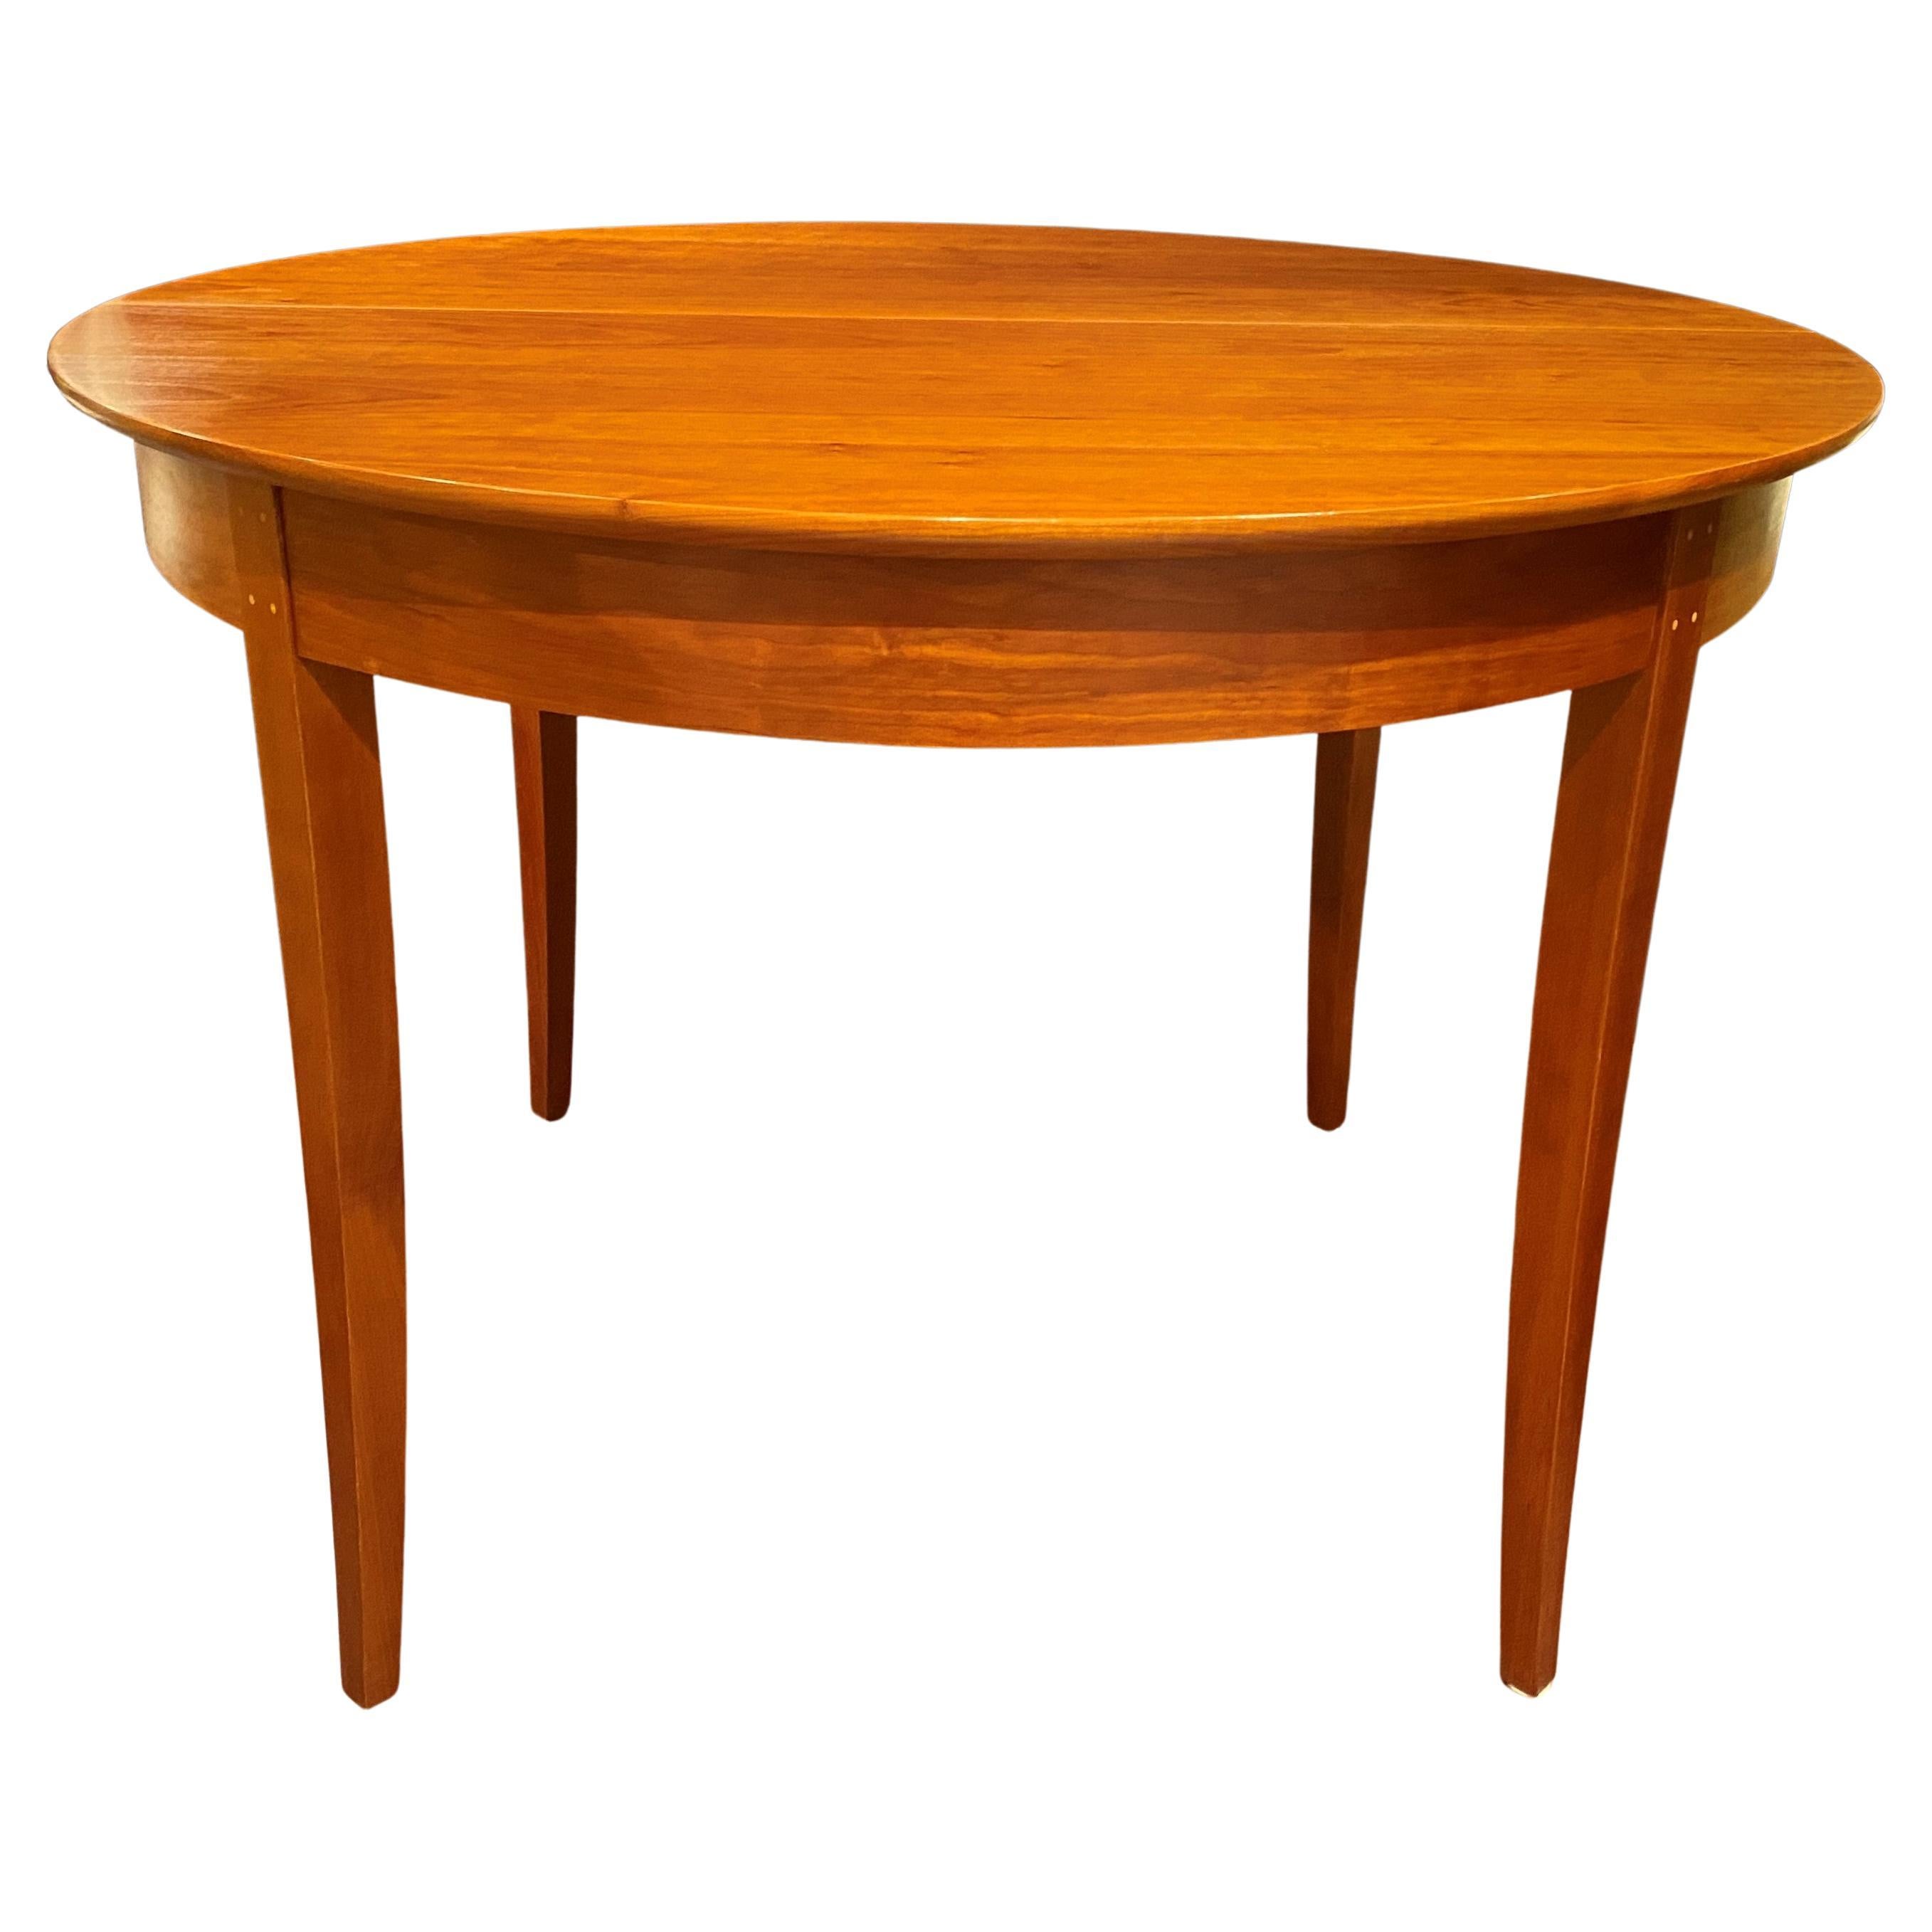 Thomas Moser Round Cherry Center Table or  Dining Table with Single Leaf